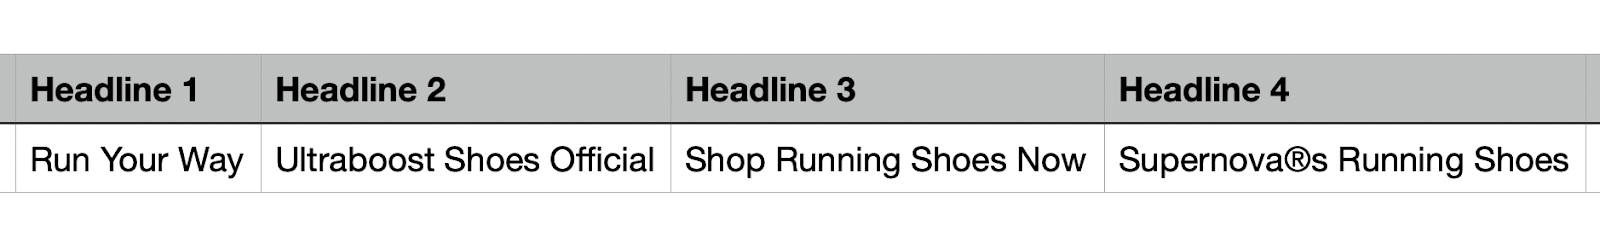 Headlines generated by AI Ad Copy Generator